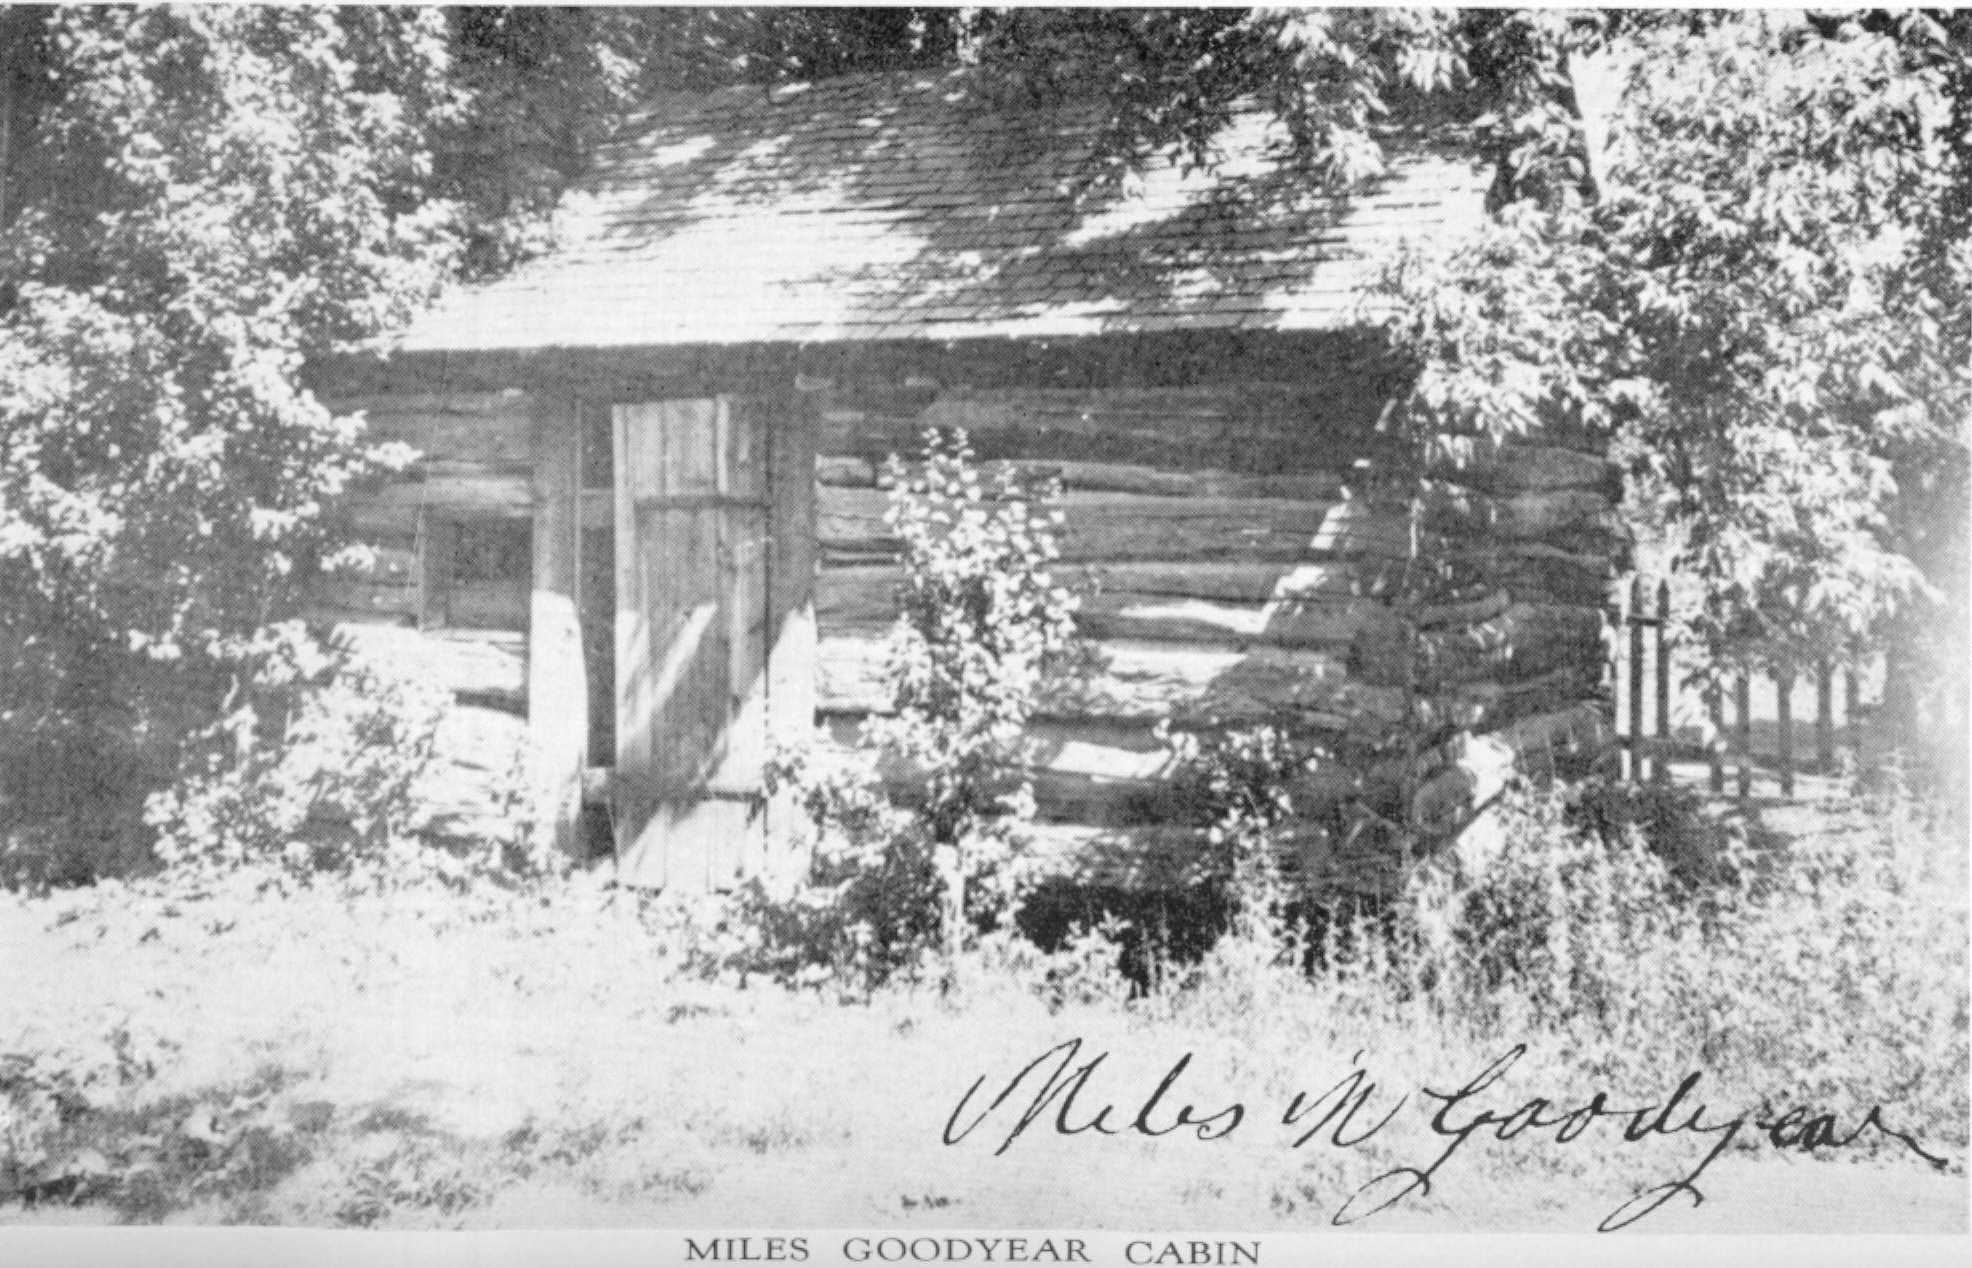 Miles M. Goodyear Cabin 1841-1847 when sold to CJB